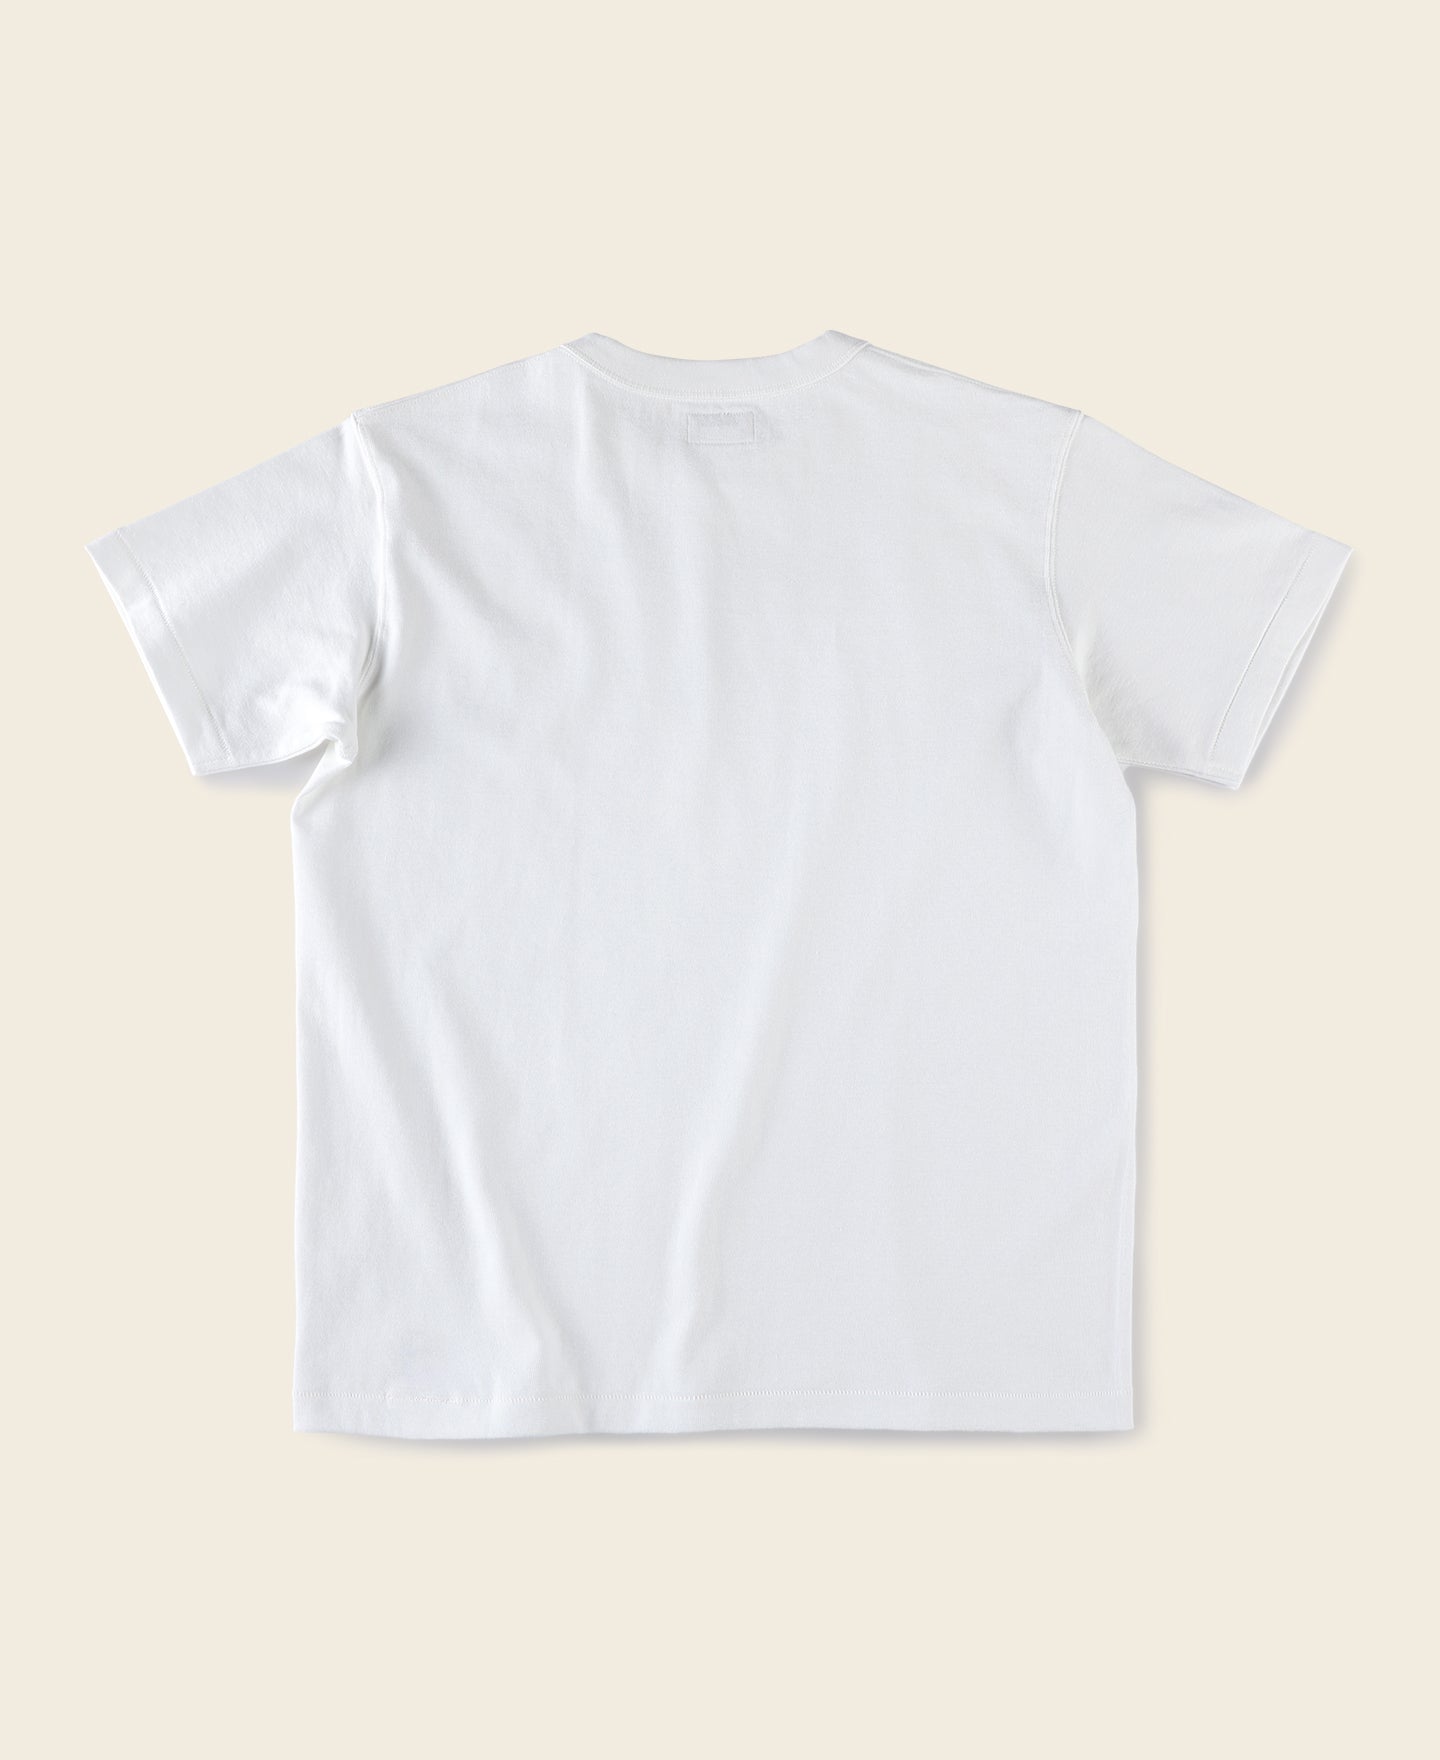 white blank t shirt front and back